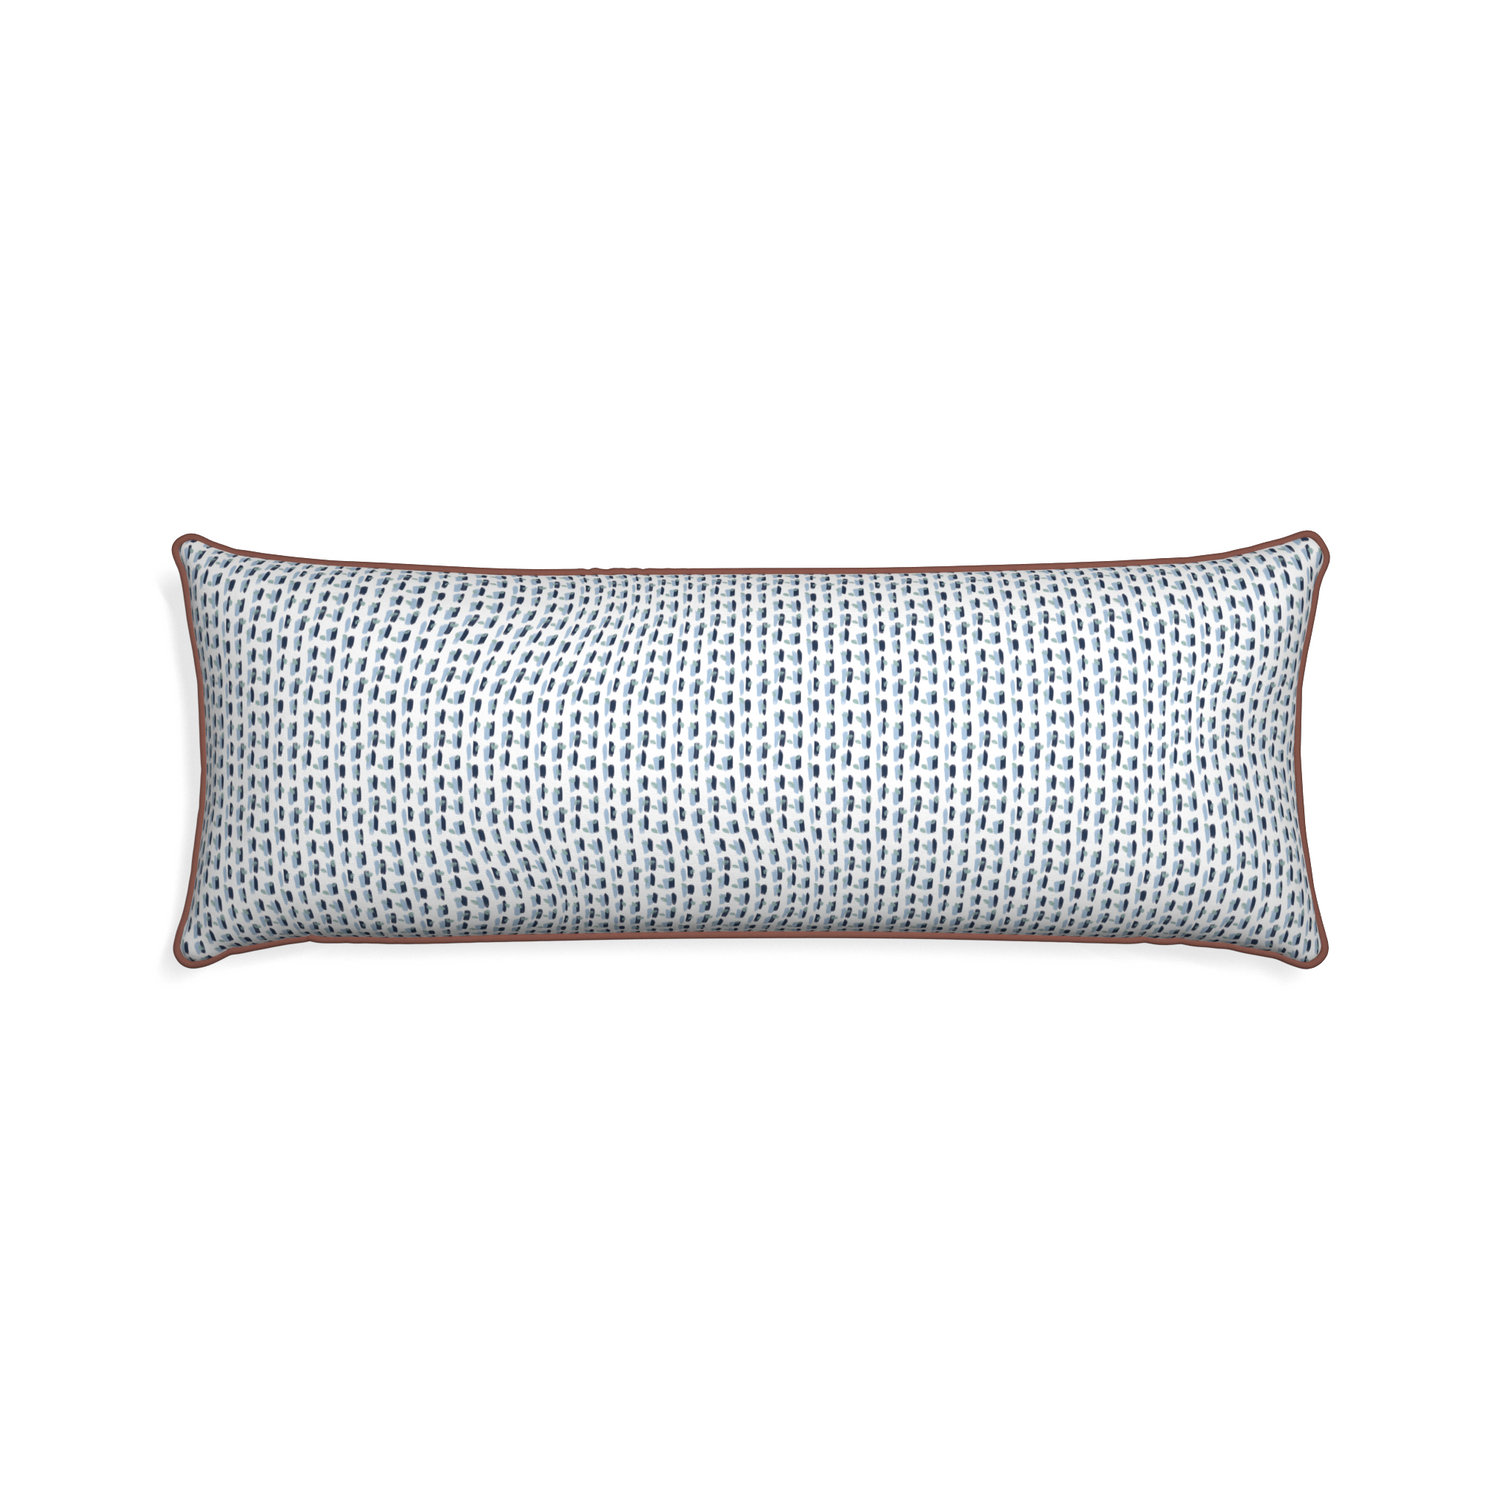 Xl-lumbar poppy blue custom pillow with w piping on white background